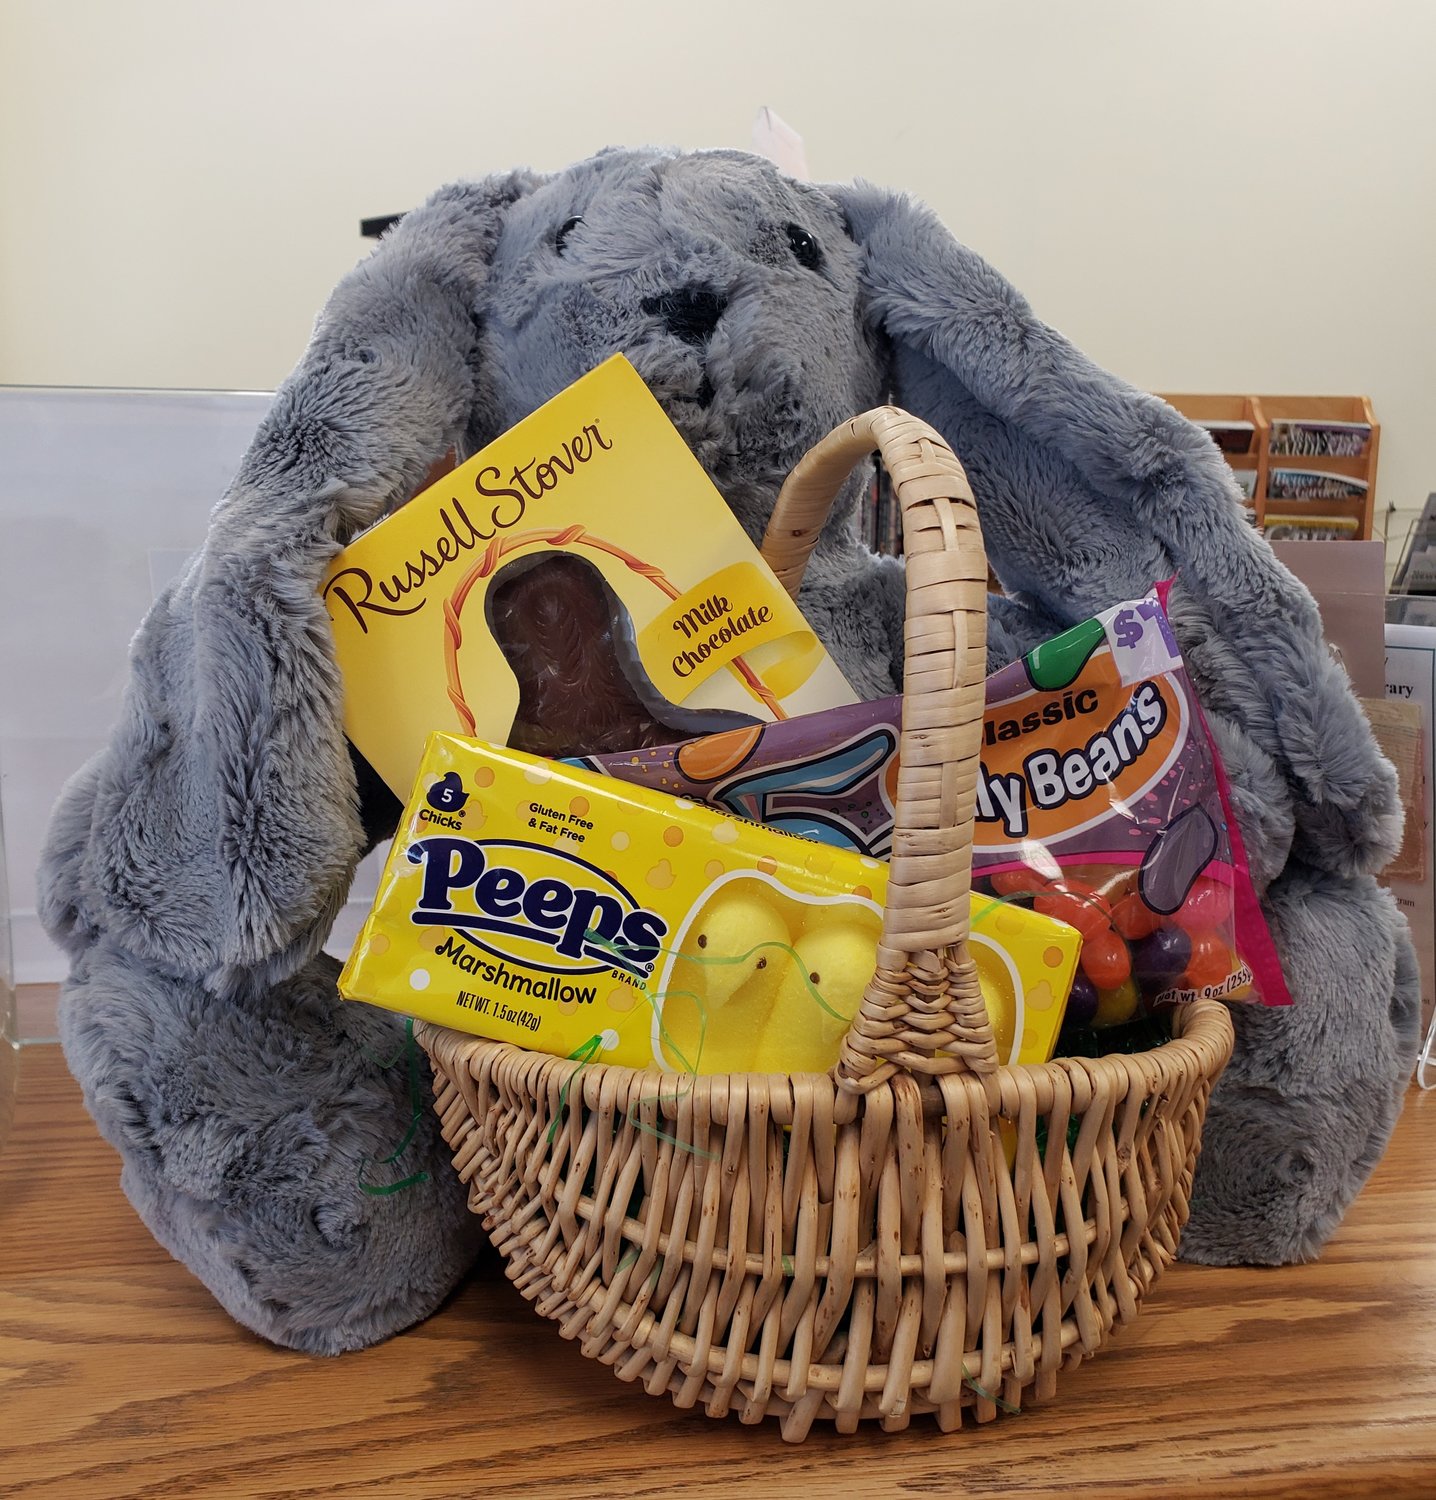 Some bunny wants to be your friend! Support the Newton County Friends of the Library by purchasing a raffle ticket for the FOL's Easter Raffle. The raffle prize is a large, very soft, gray stuffed bunny; a basket and candy.